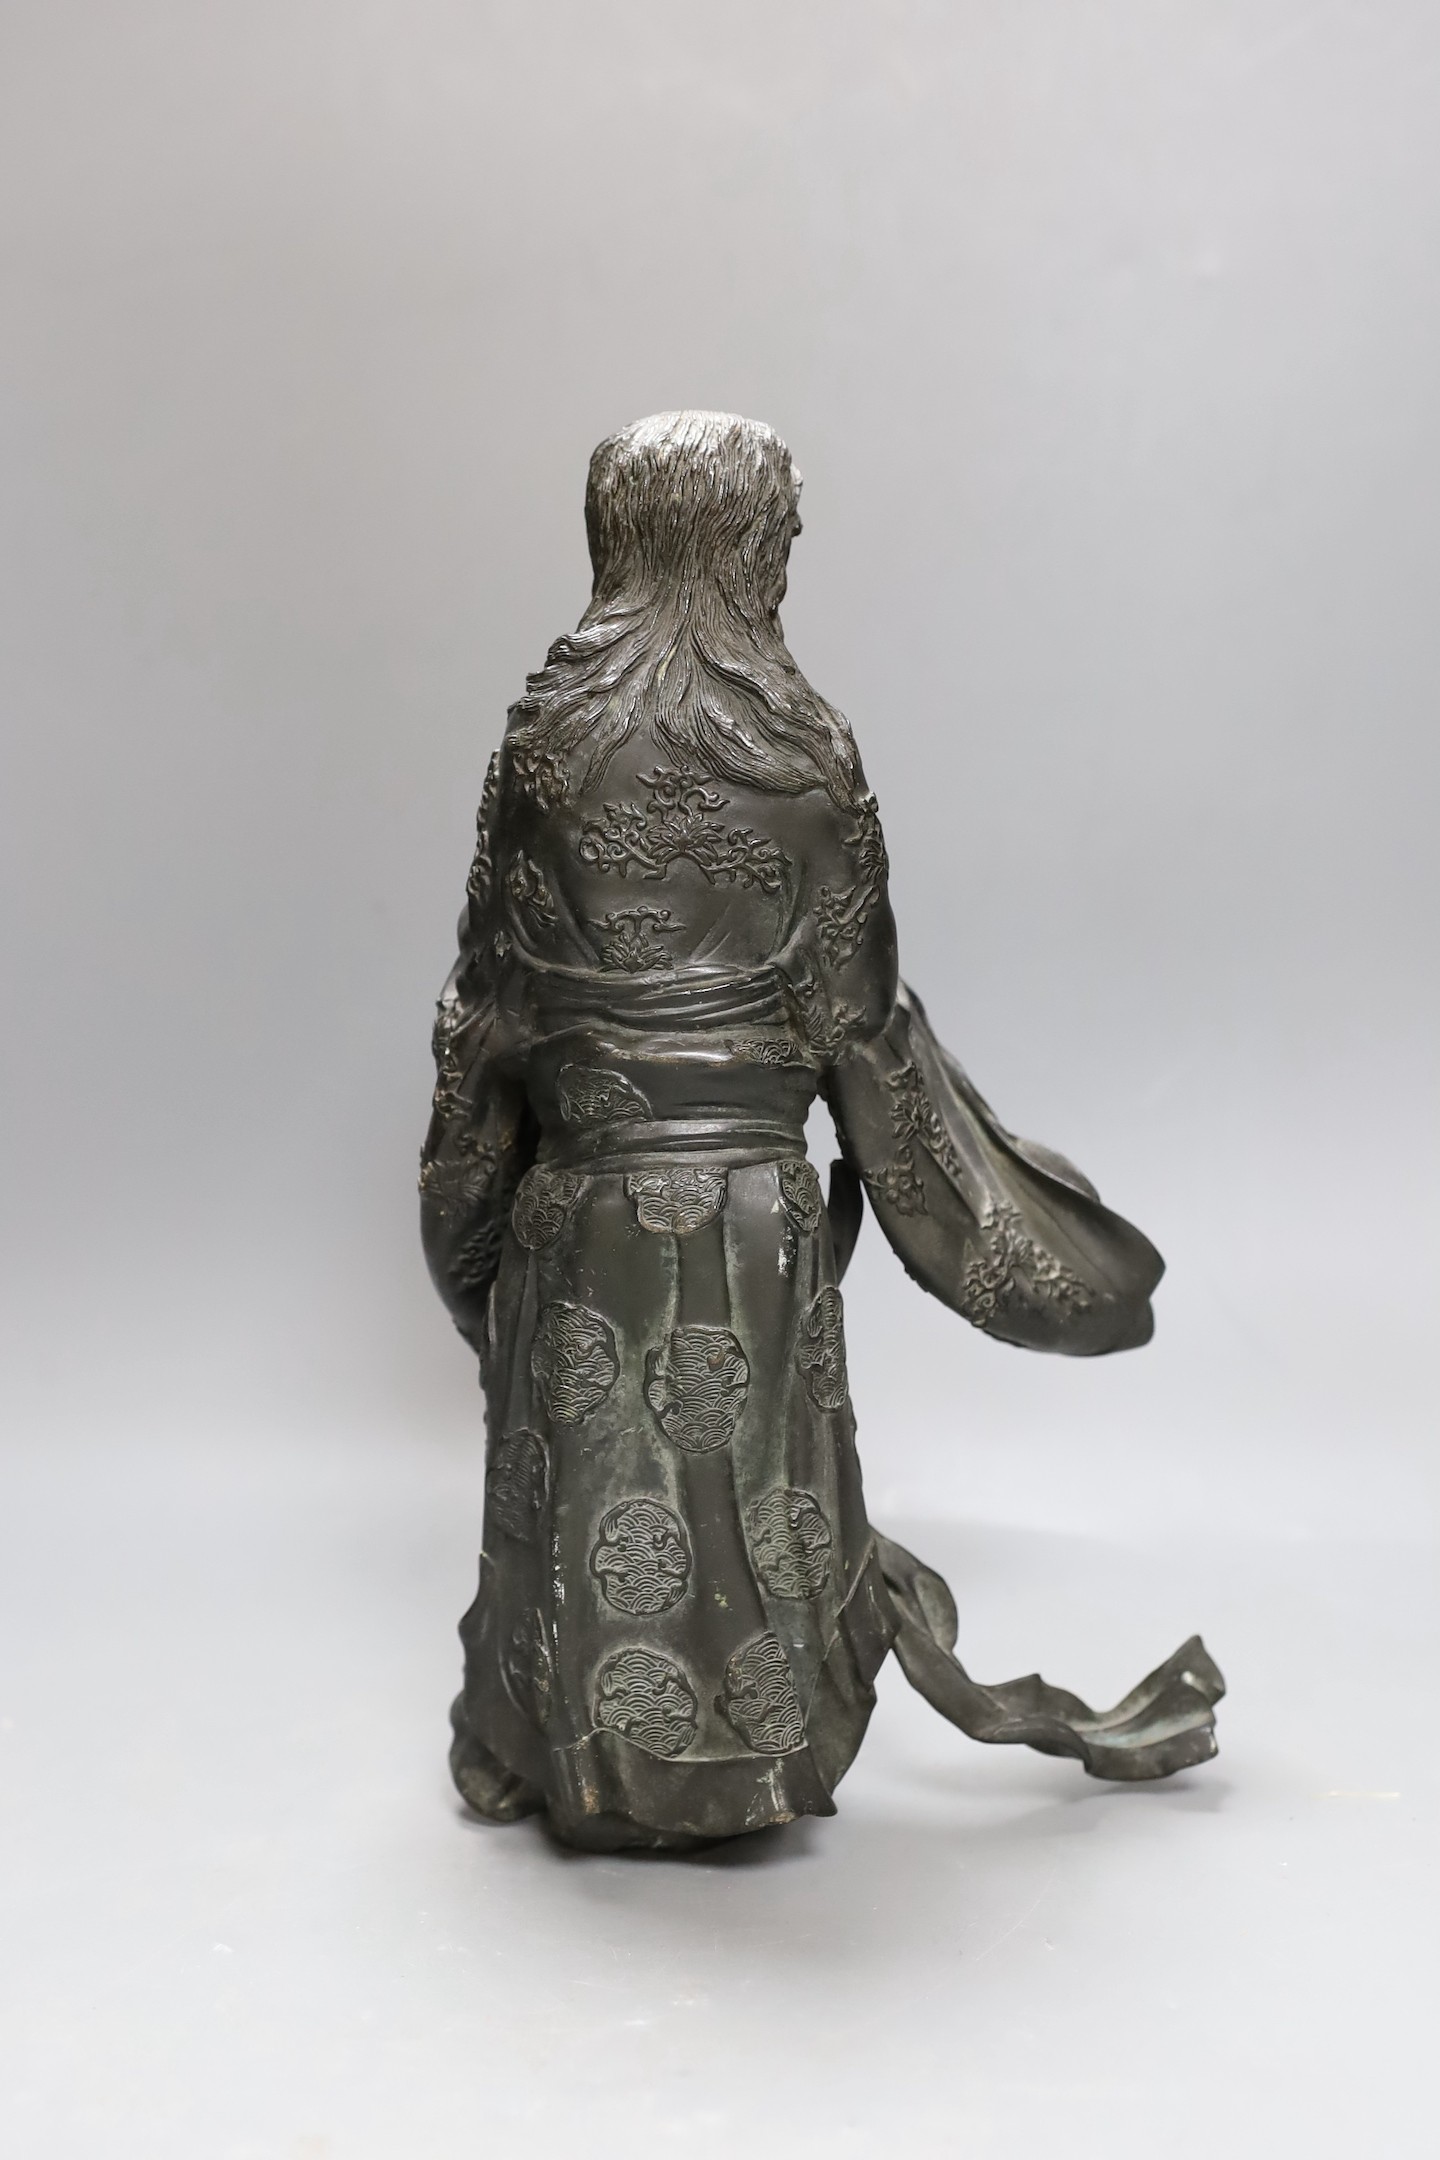 A heavily cast Japanese bronze figure of a bearded man with flowing robes, Meiji period, 31cm tall - Image 2 of 2